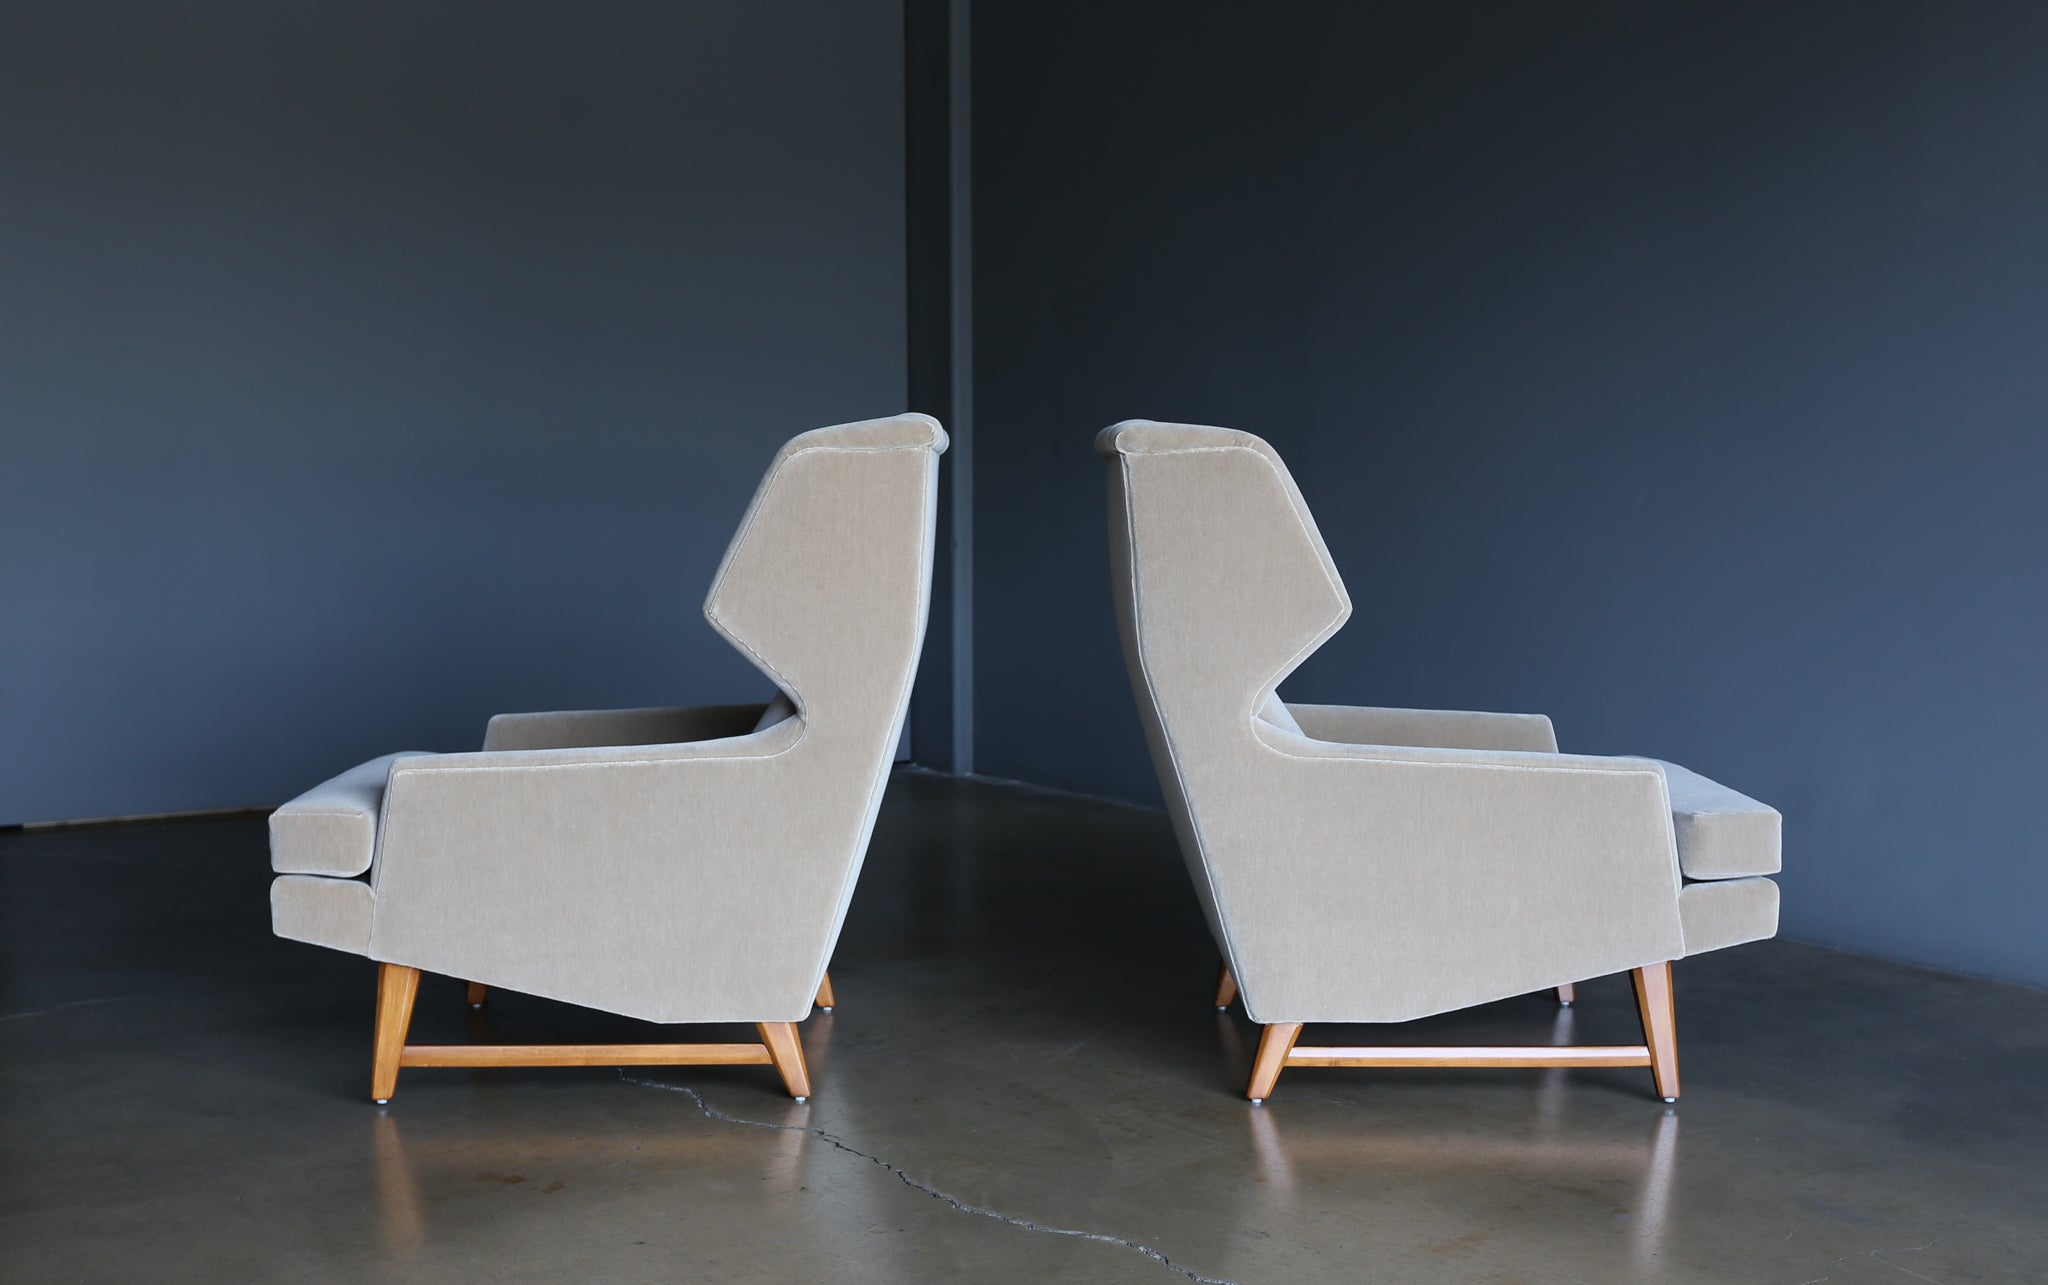 = SOLD = American Design Modernist Wingback Lounge Chairs in Mohair, circa 1955